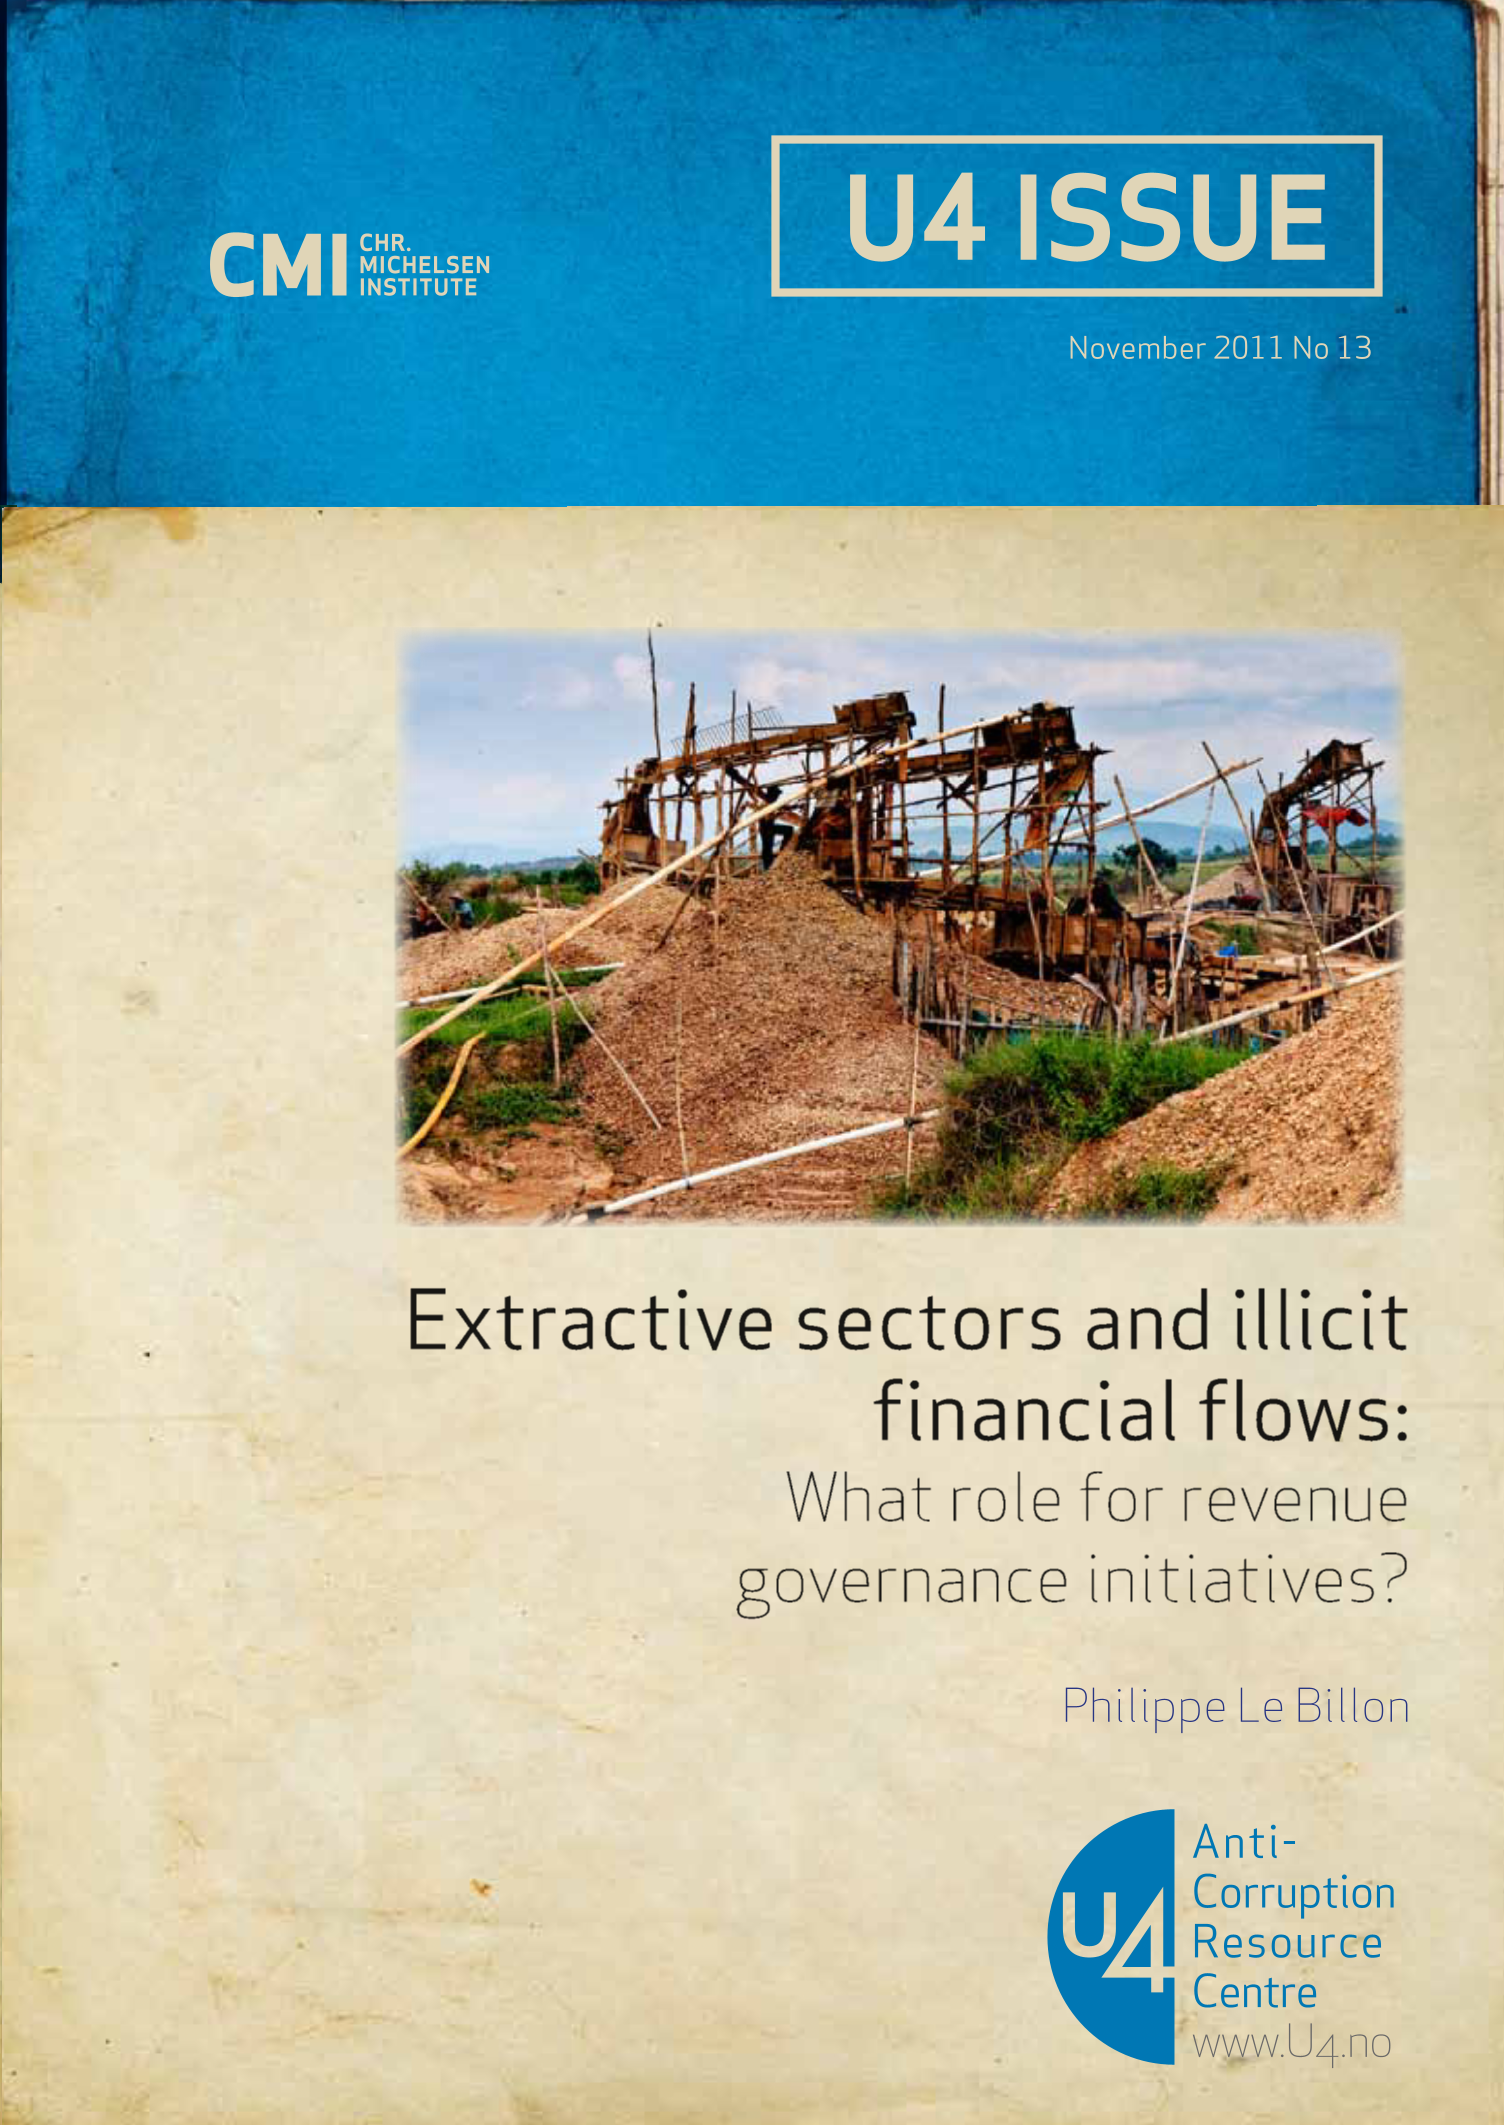 Extractive sectors and illicit financial flows: What role for revenue governance initiatives?